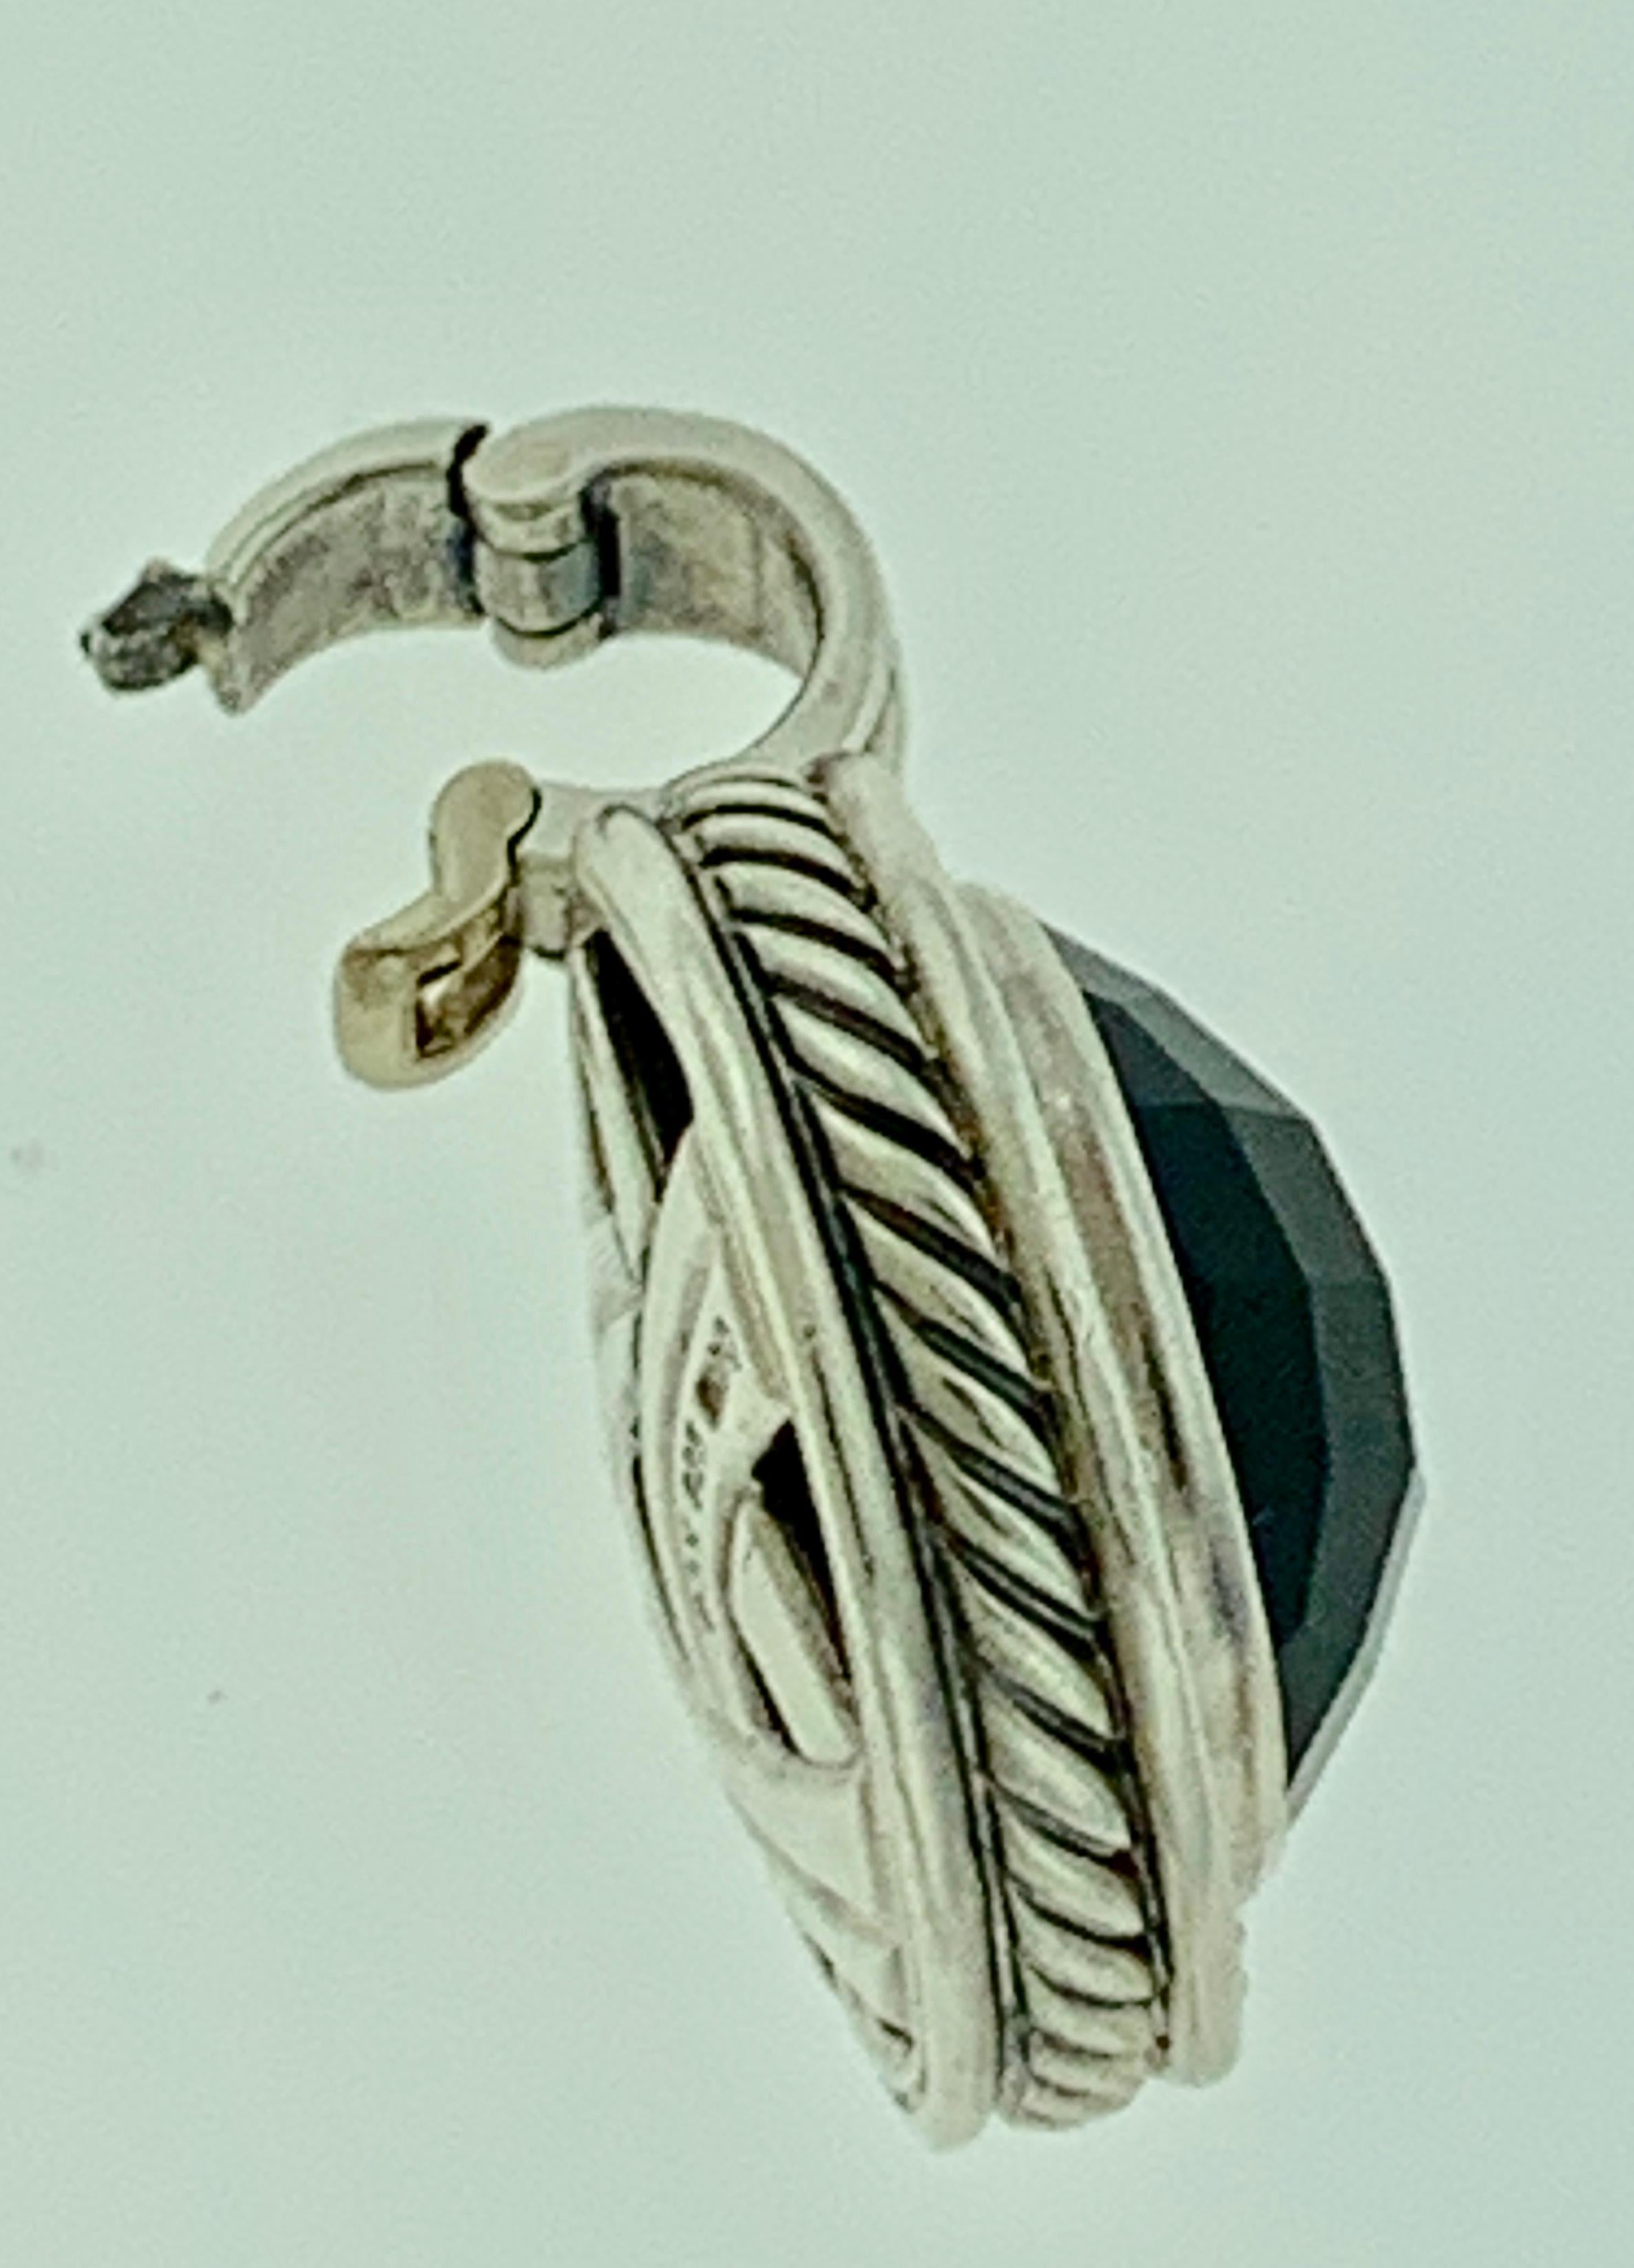   David Yurman pendant in sterling silver with checkerboard cut black onyx and a halo of round brilliant cut diamonds.

Measures 2.5 cm
weight 18 Grams
Please look at all the pictures
Its very hard to capture the true color and luster of the stone,